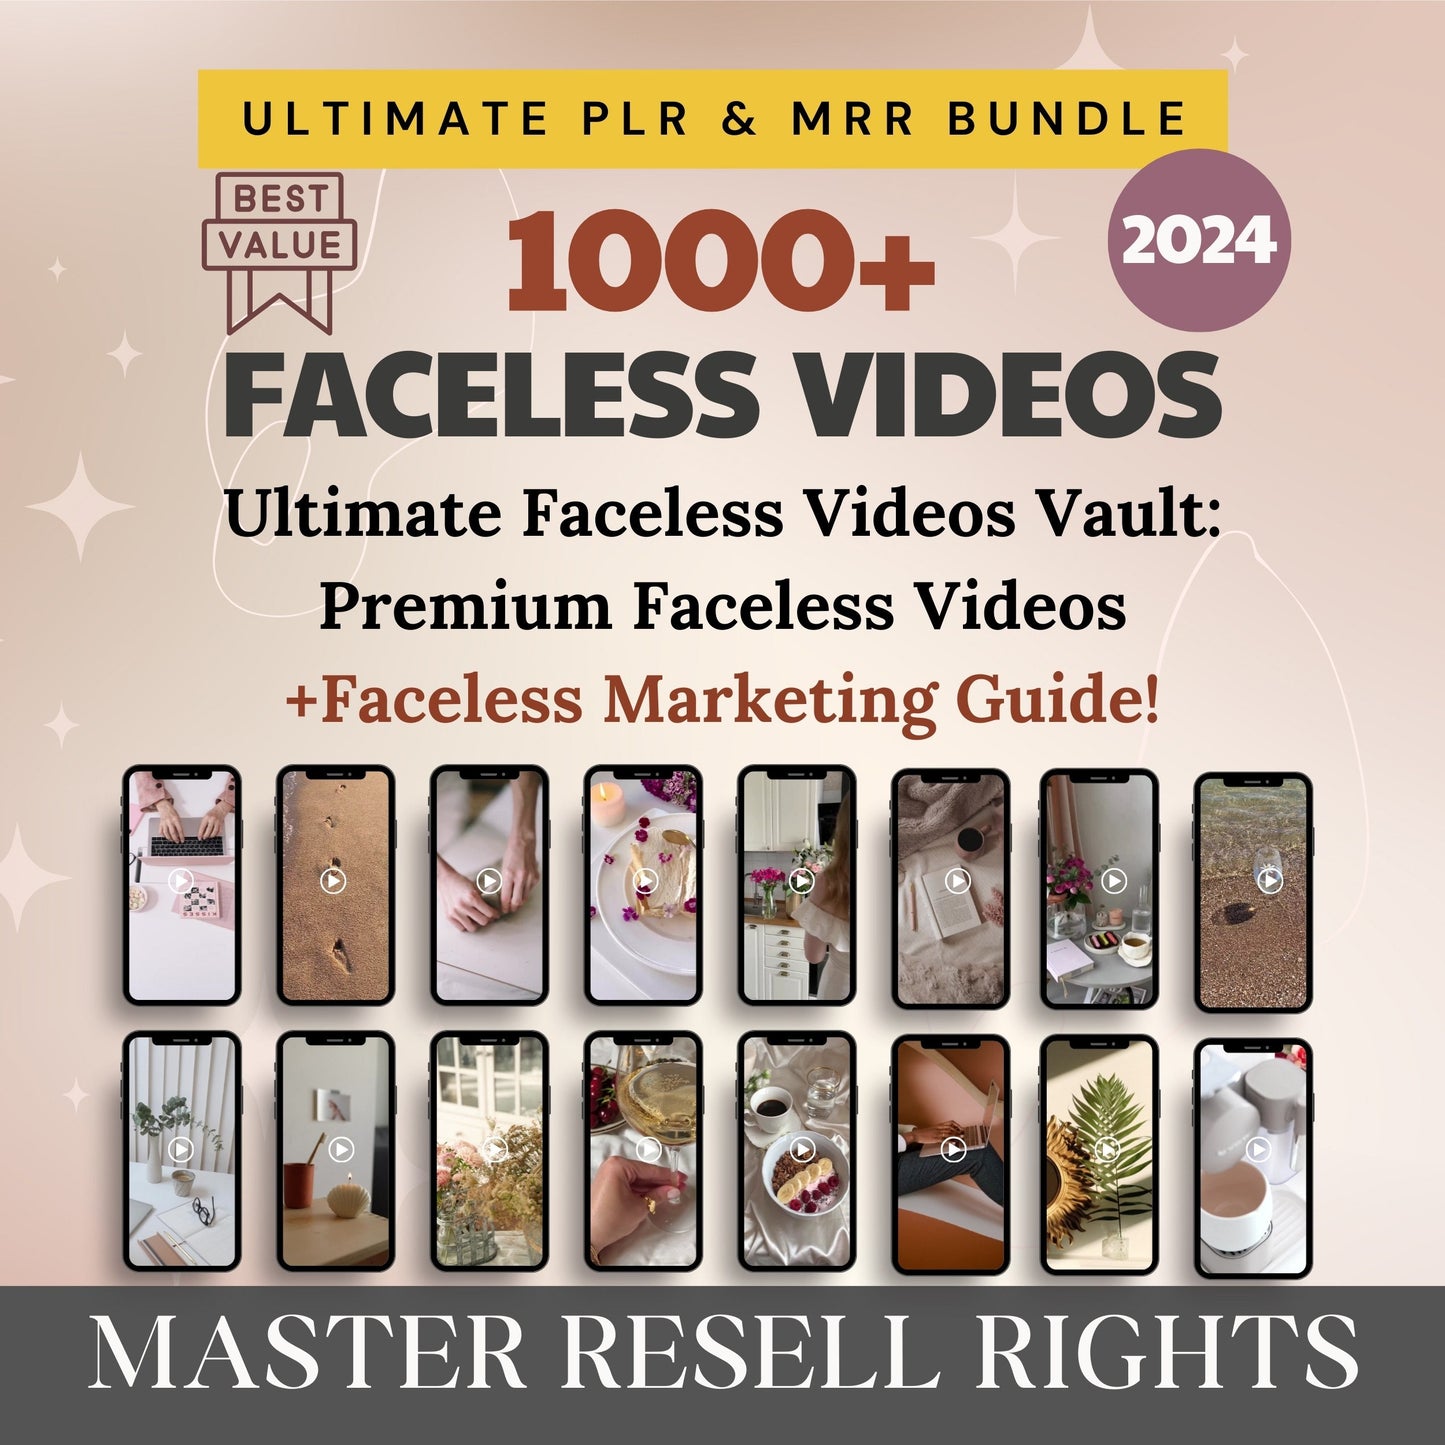 PLR Digital Products Master Resell Rights Etsy Sellers Bundle zum Verkauf auf Etsy Passive Income PLR ​​Faceless Reels ChatGpt Prompts PLR Planner